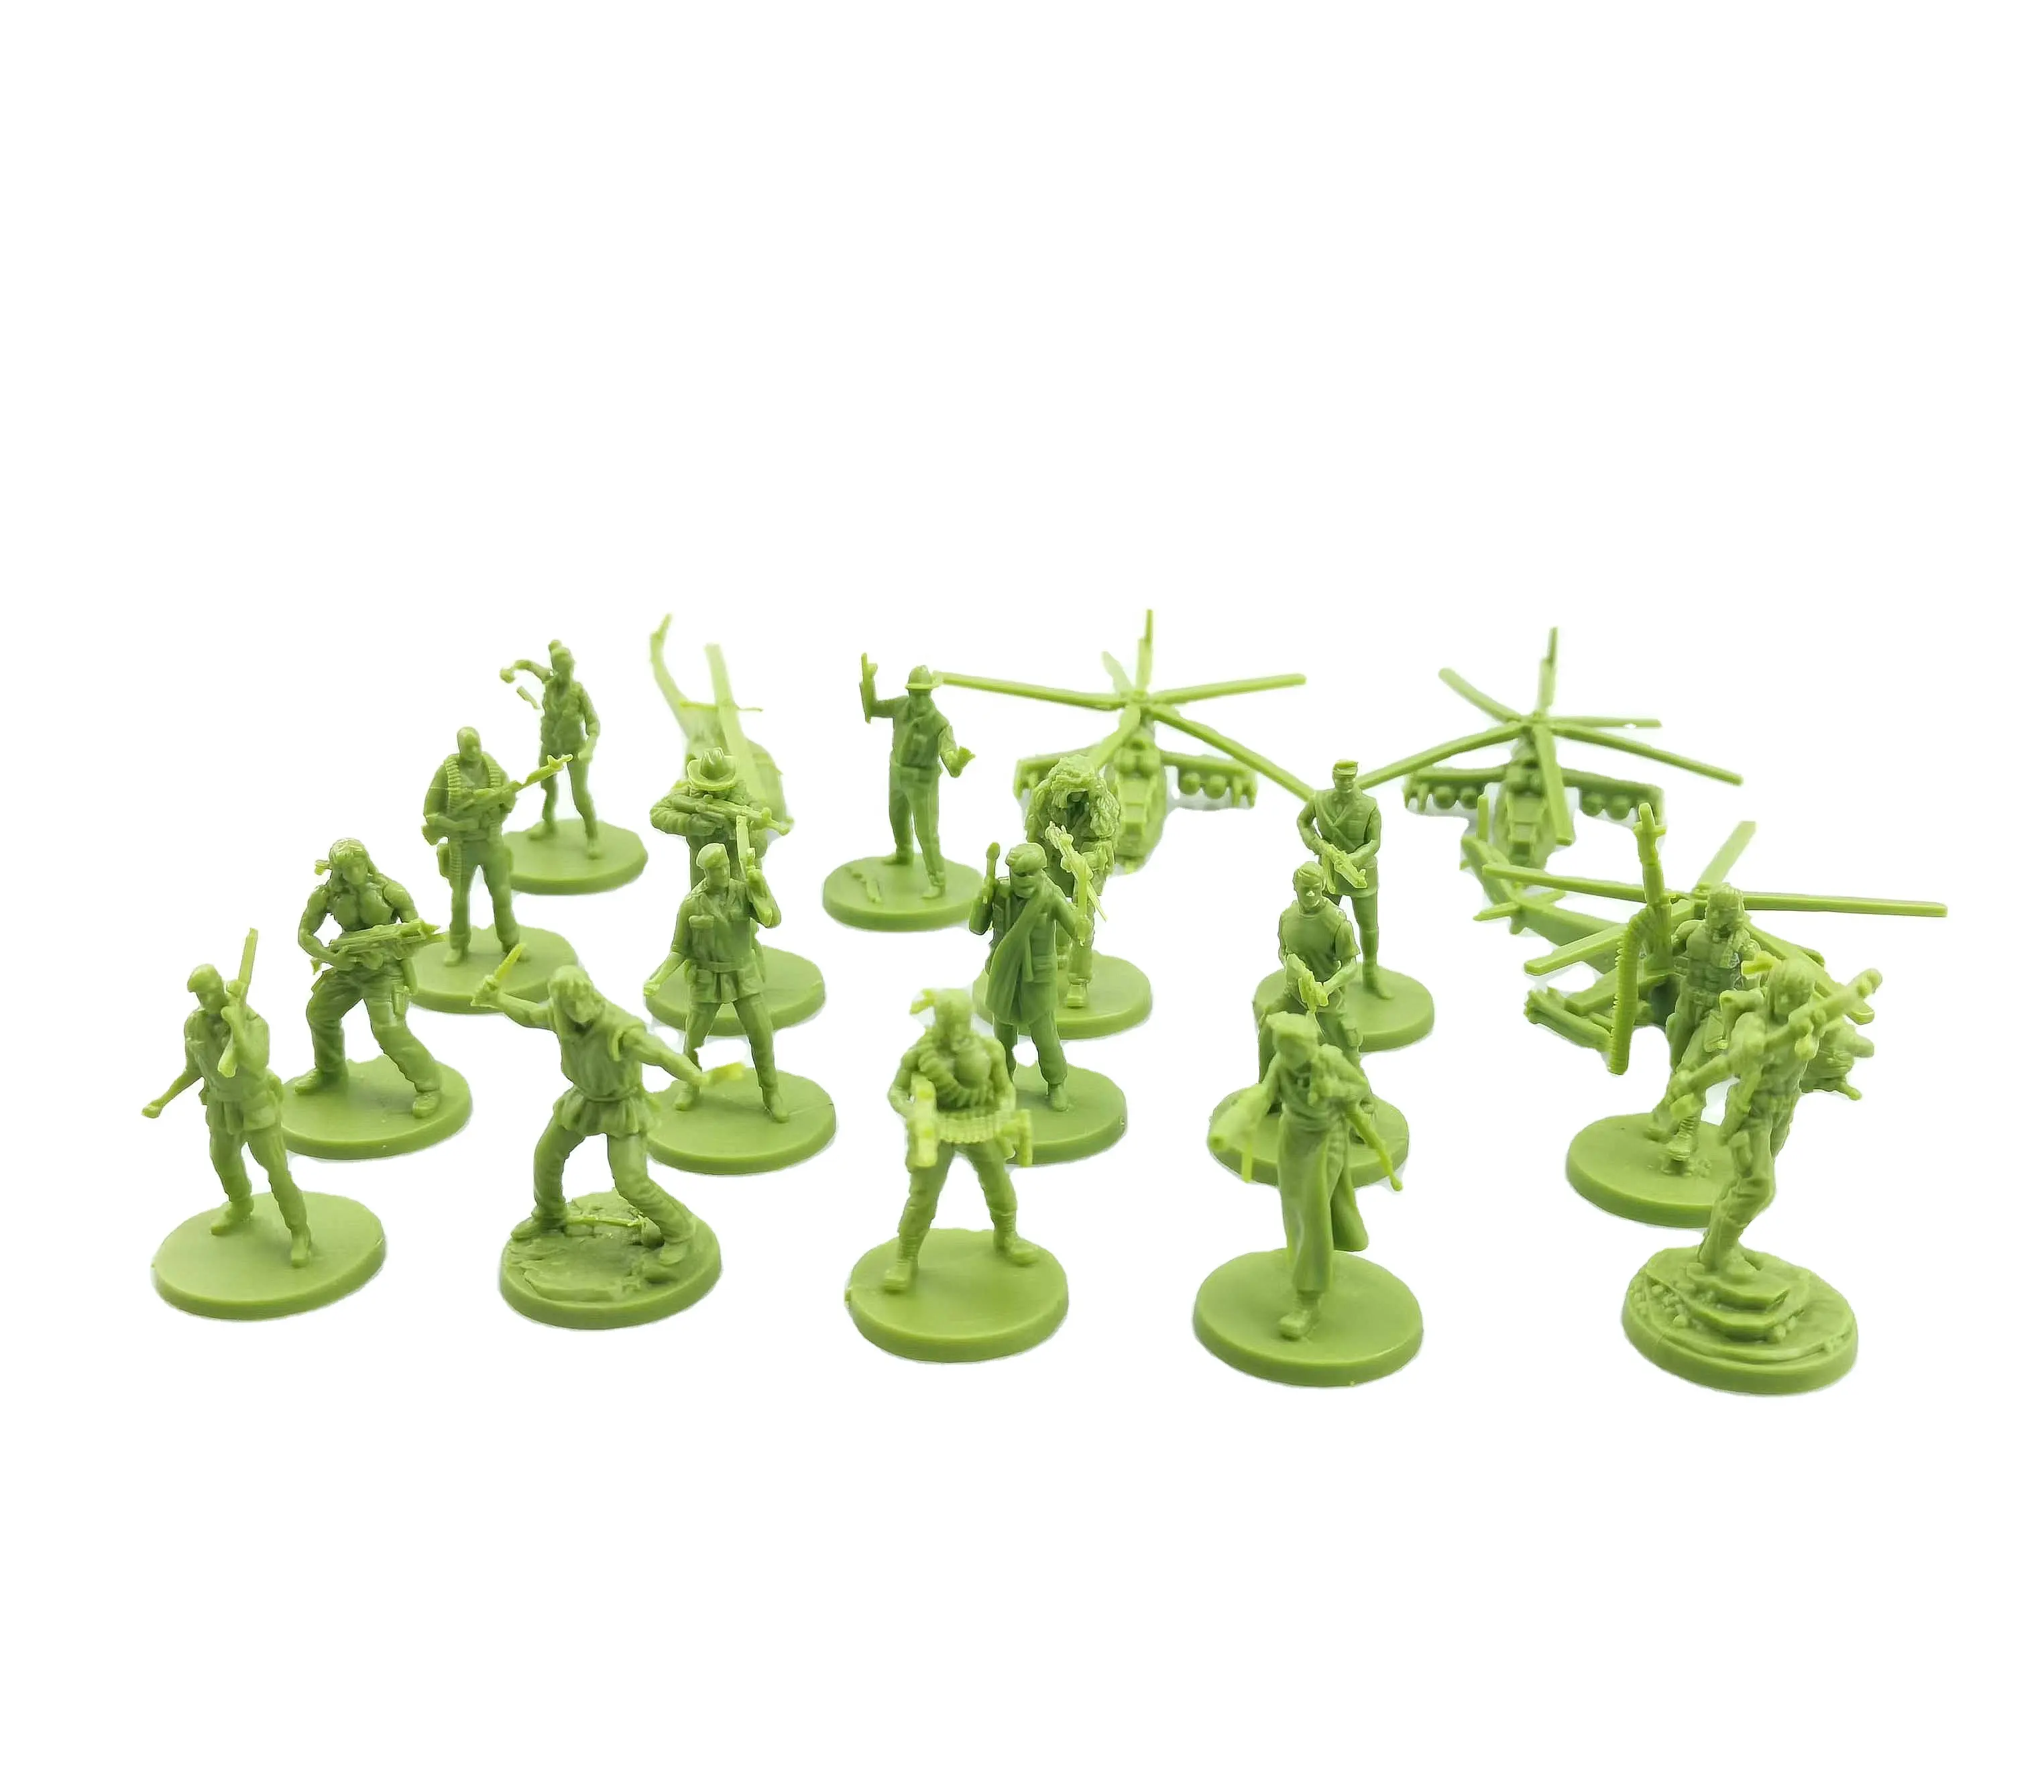 Figurine Custom War Game Figurines Small PVC and Resin Miniatures Military and Cartoon Style Plastic Toy Figurines